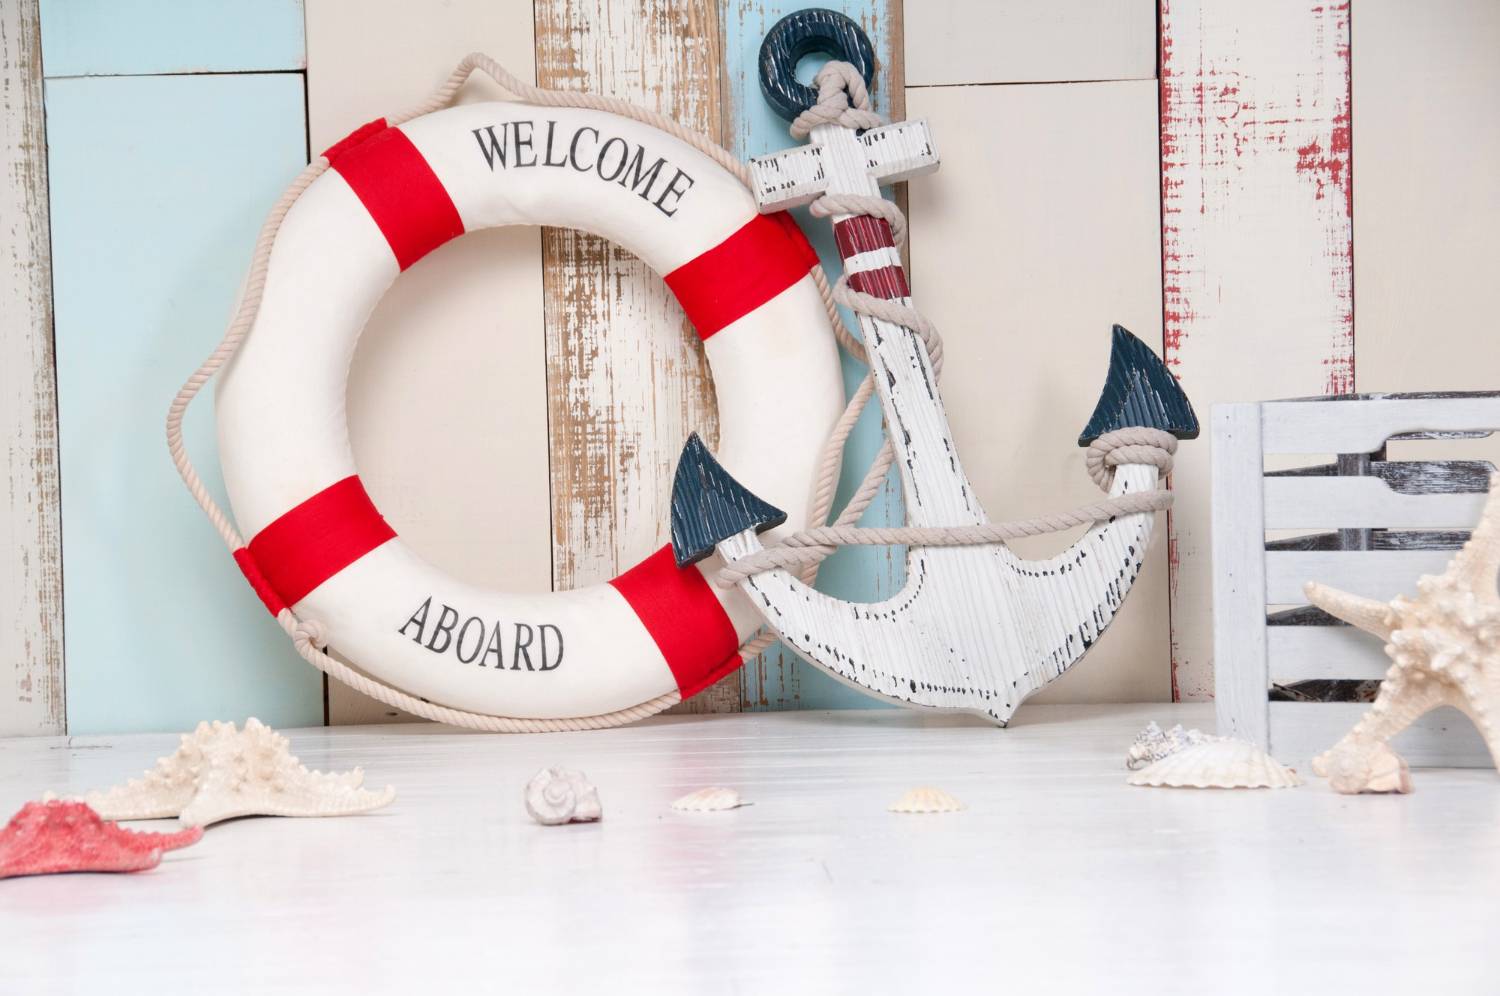 A lifebuoy and anchor decoration with the phrase "WELCOME ABOARD" against a rustic background, suggesting nautical home decor.